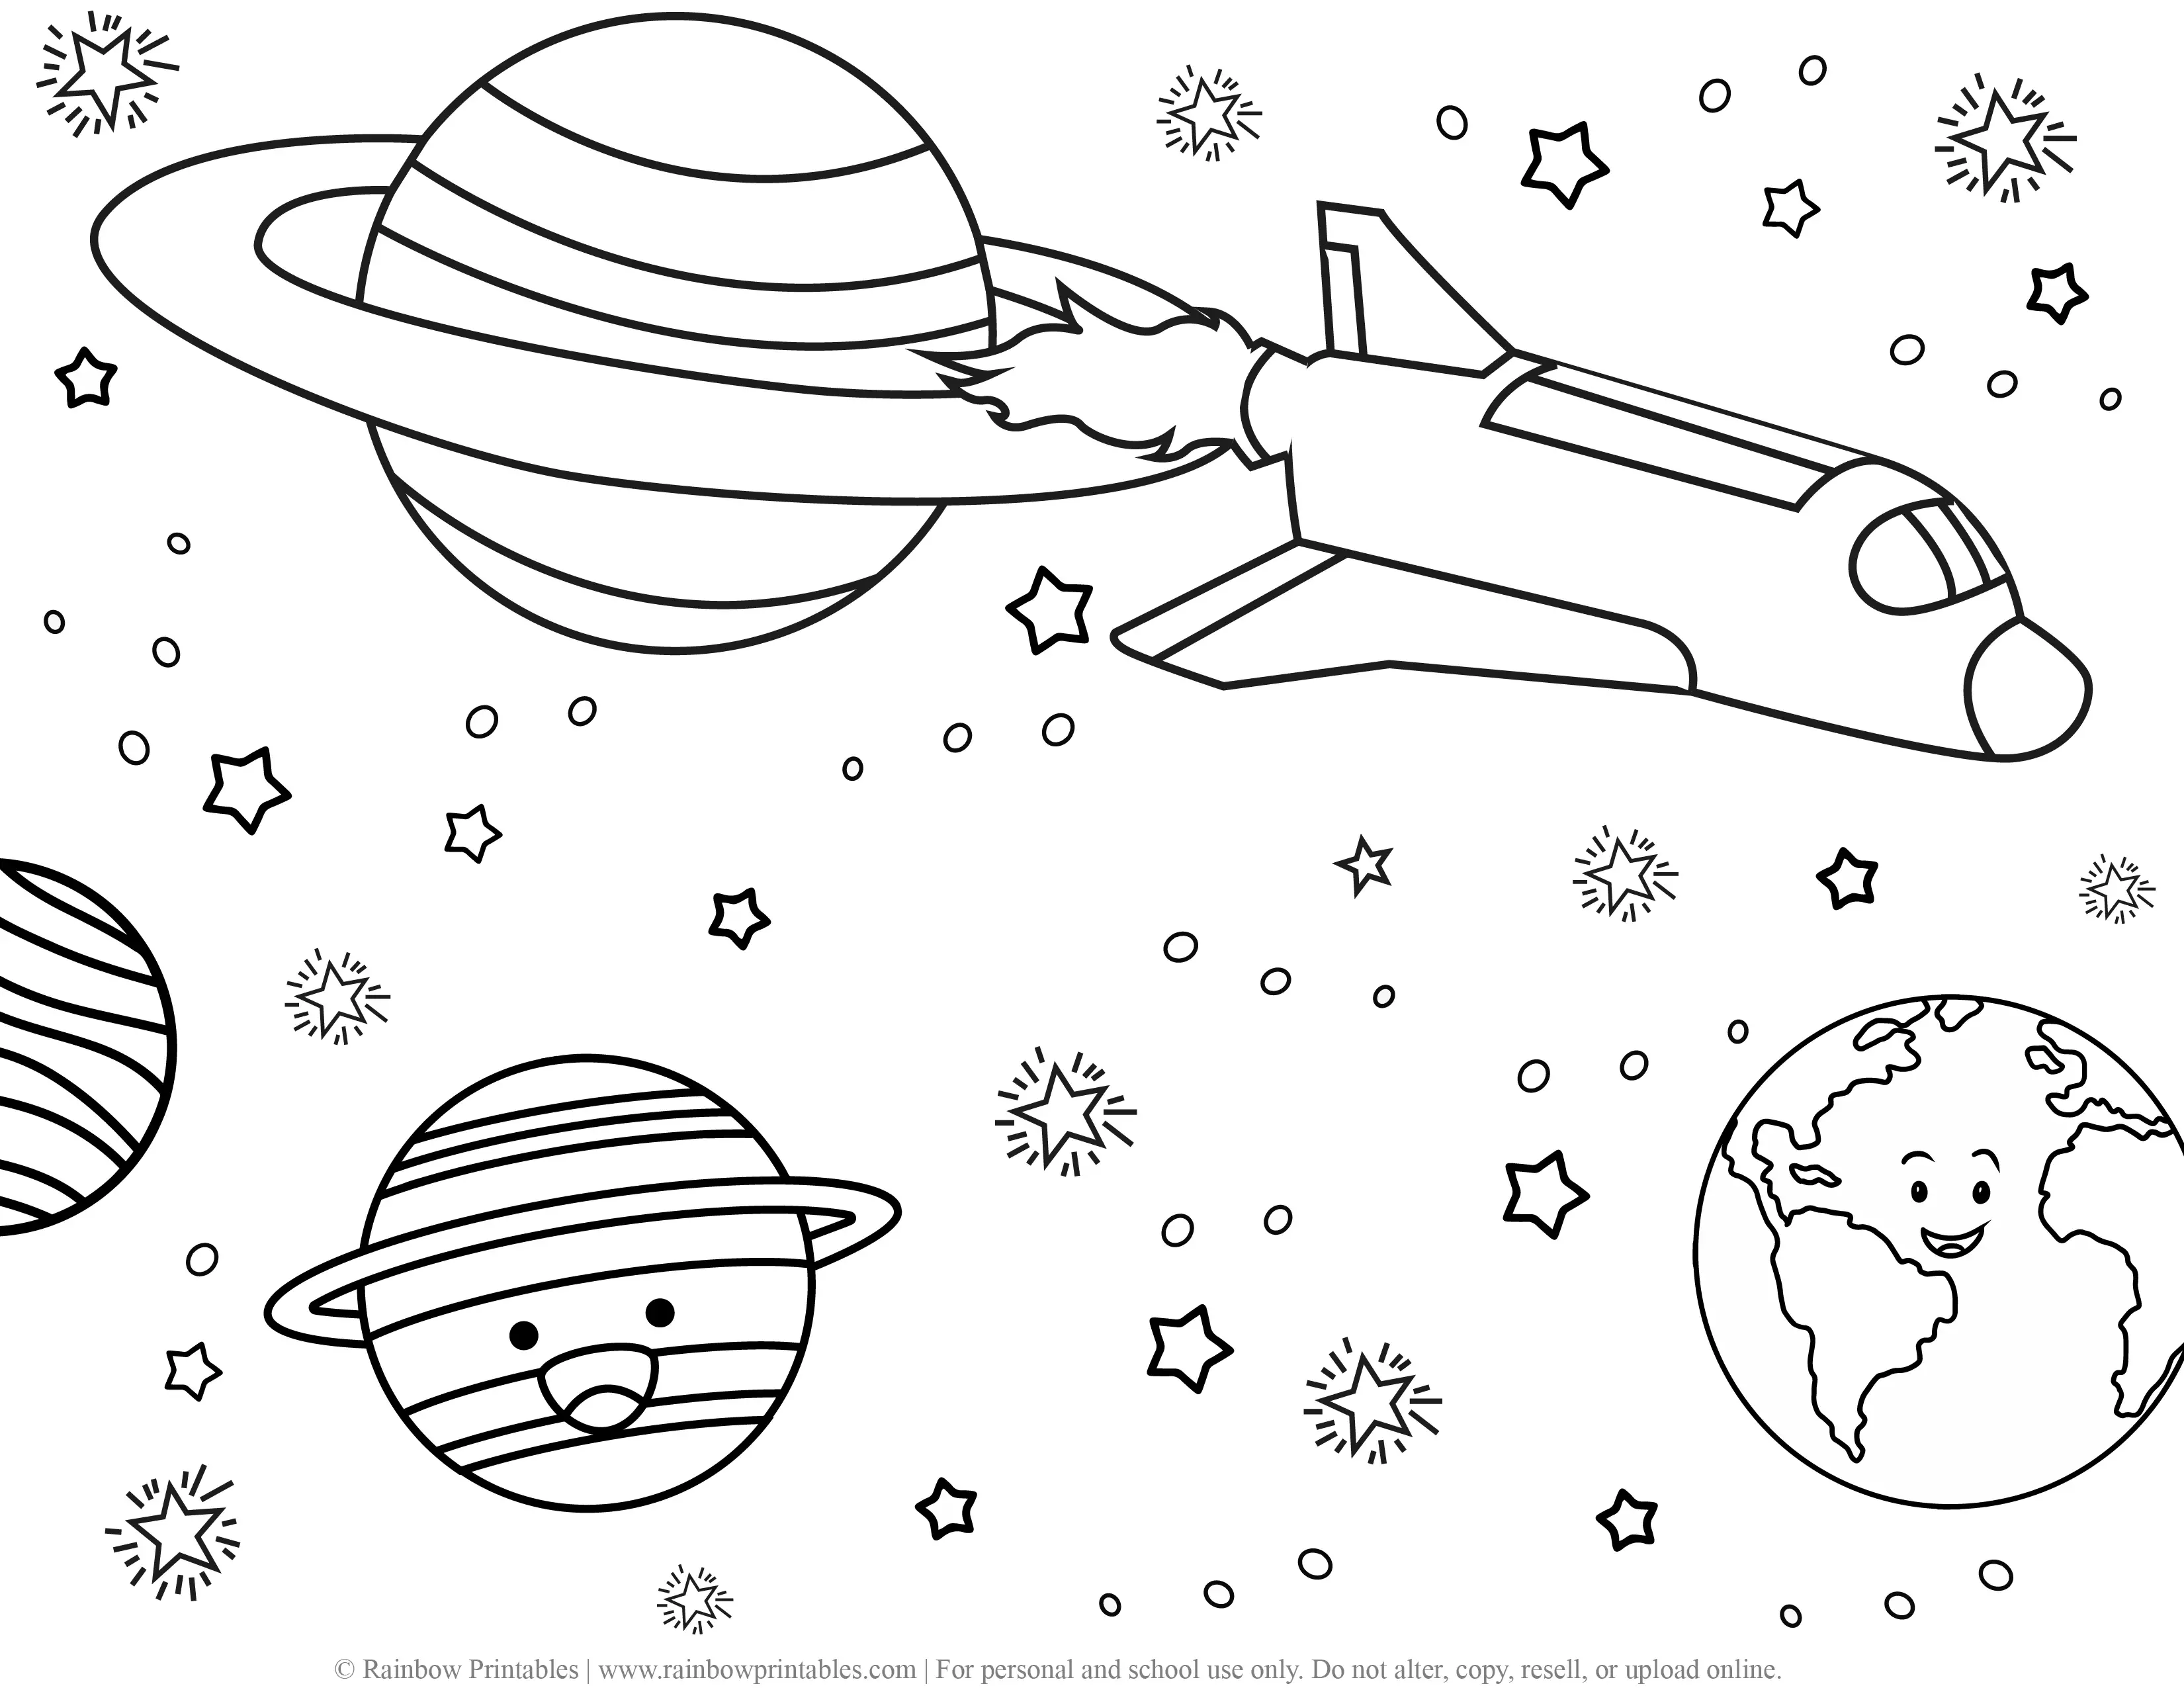 Rocket ship in Outer Space With Planets Saturn Mars Earth Meteor Stars Galaxy Launch Rocket Coloring Page for Kids